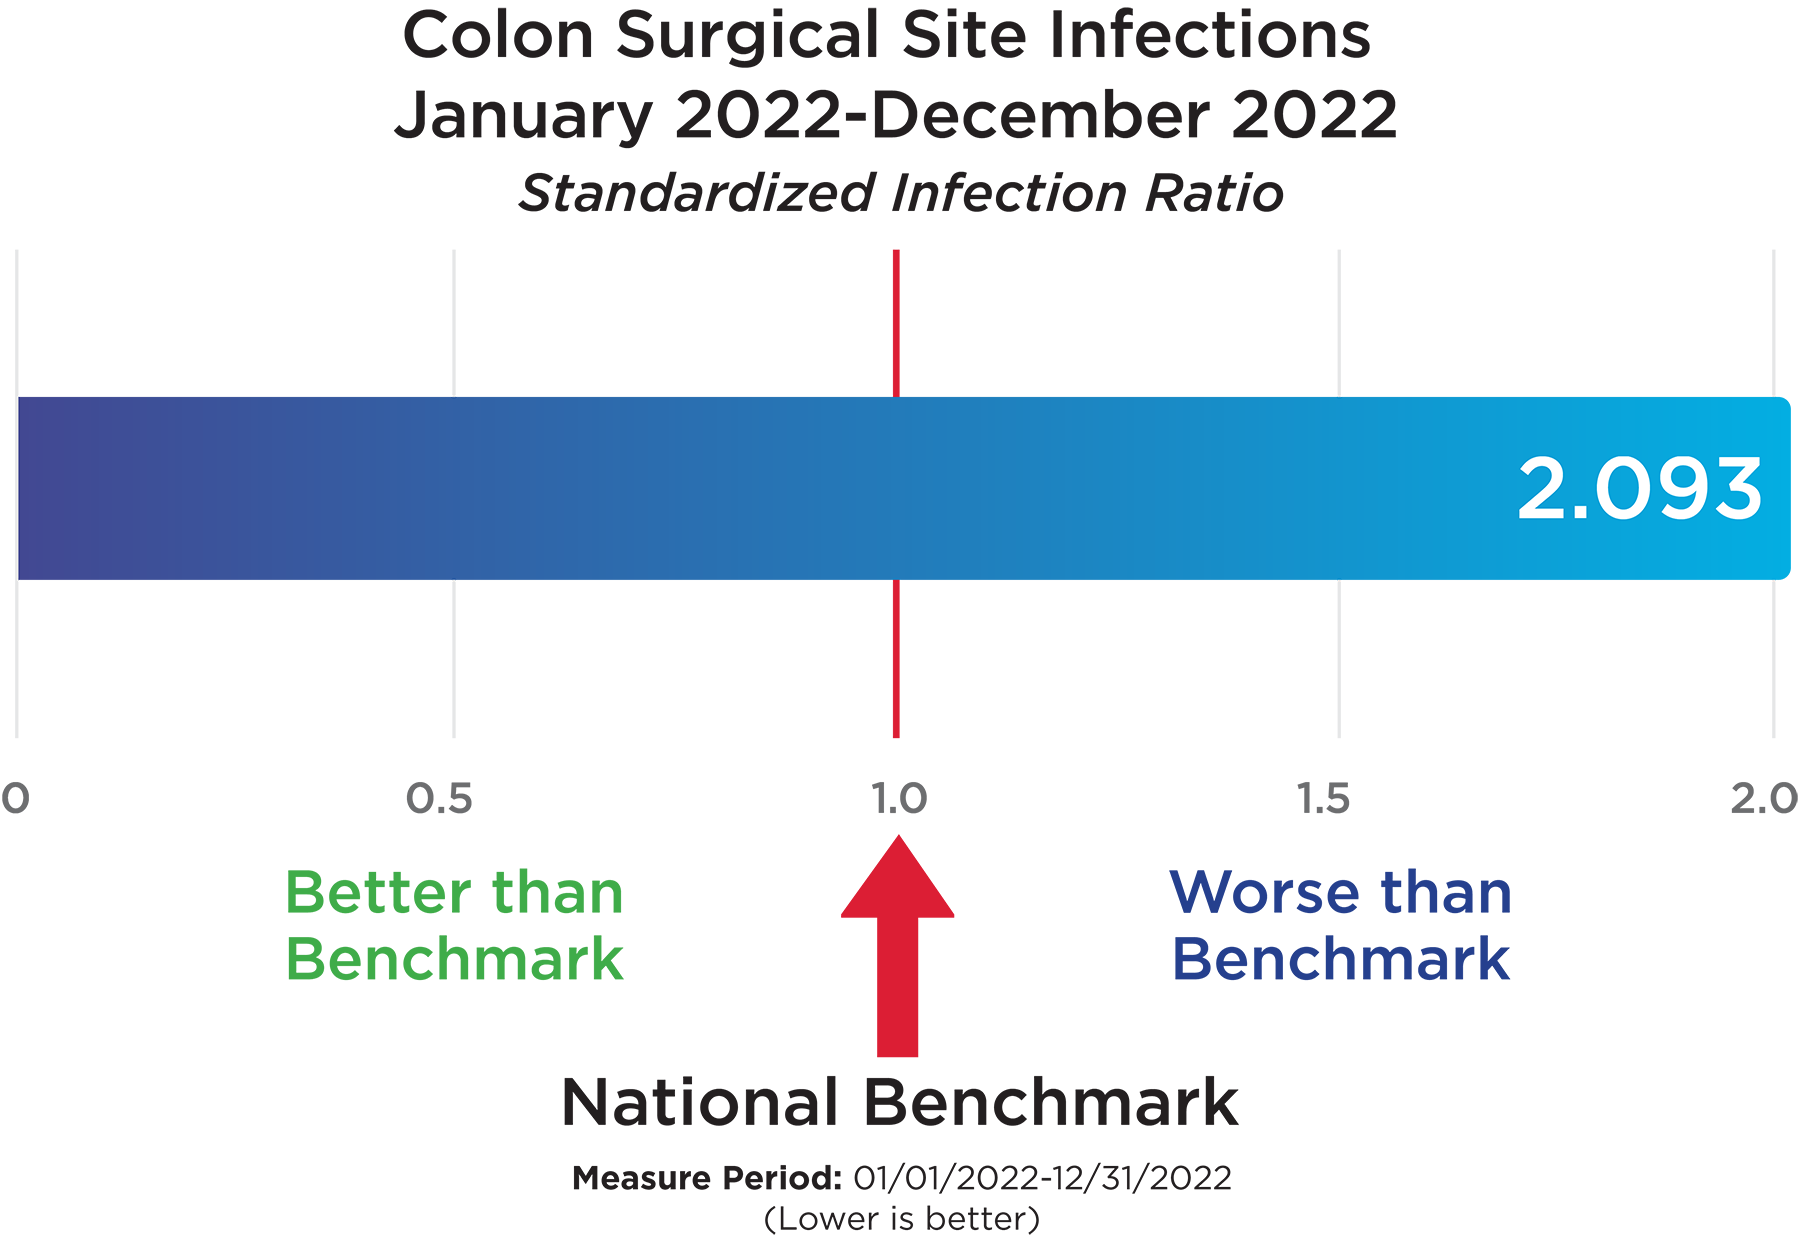 Colon Surgical Site Infections, January 2022-December 2022